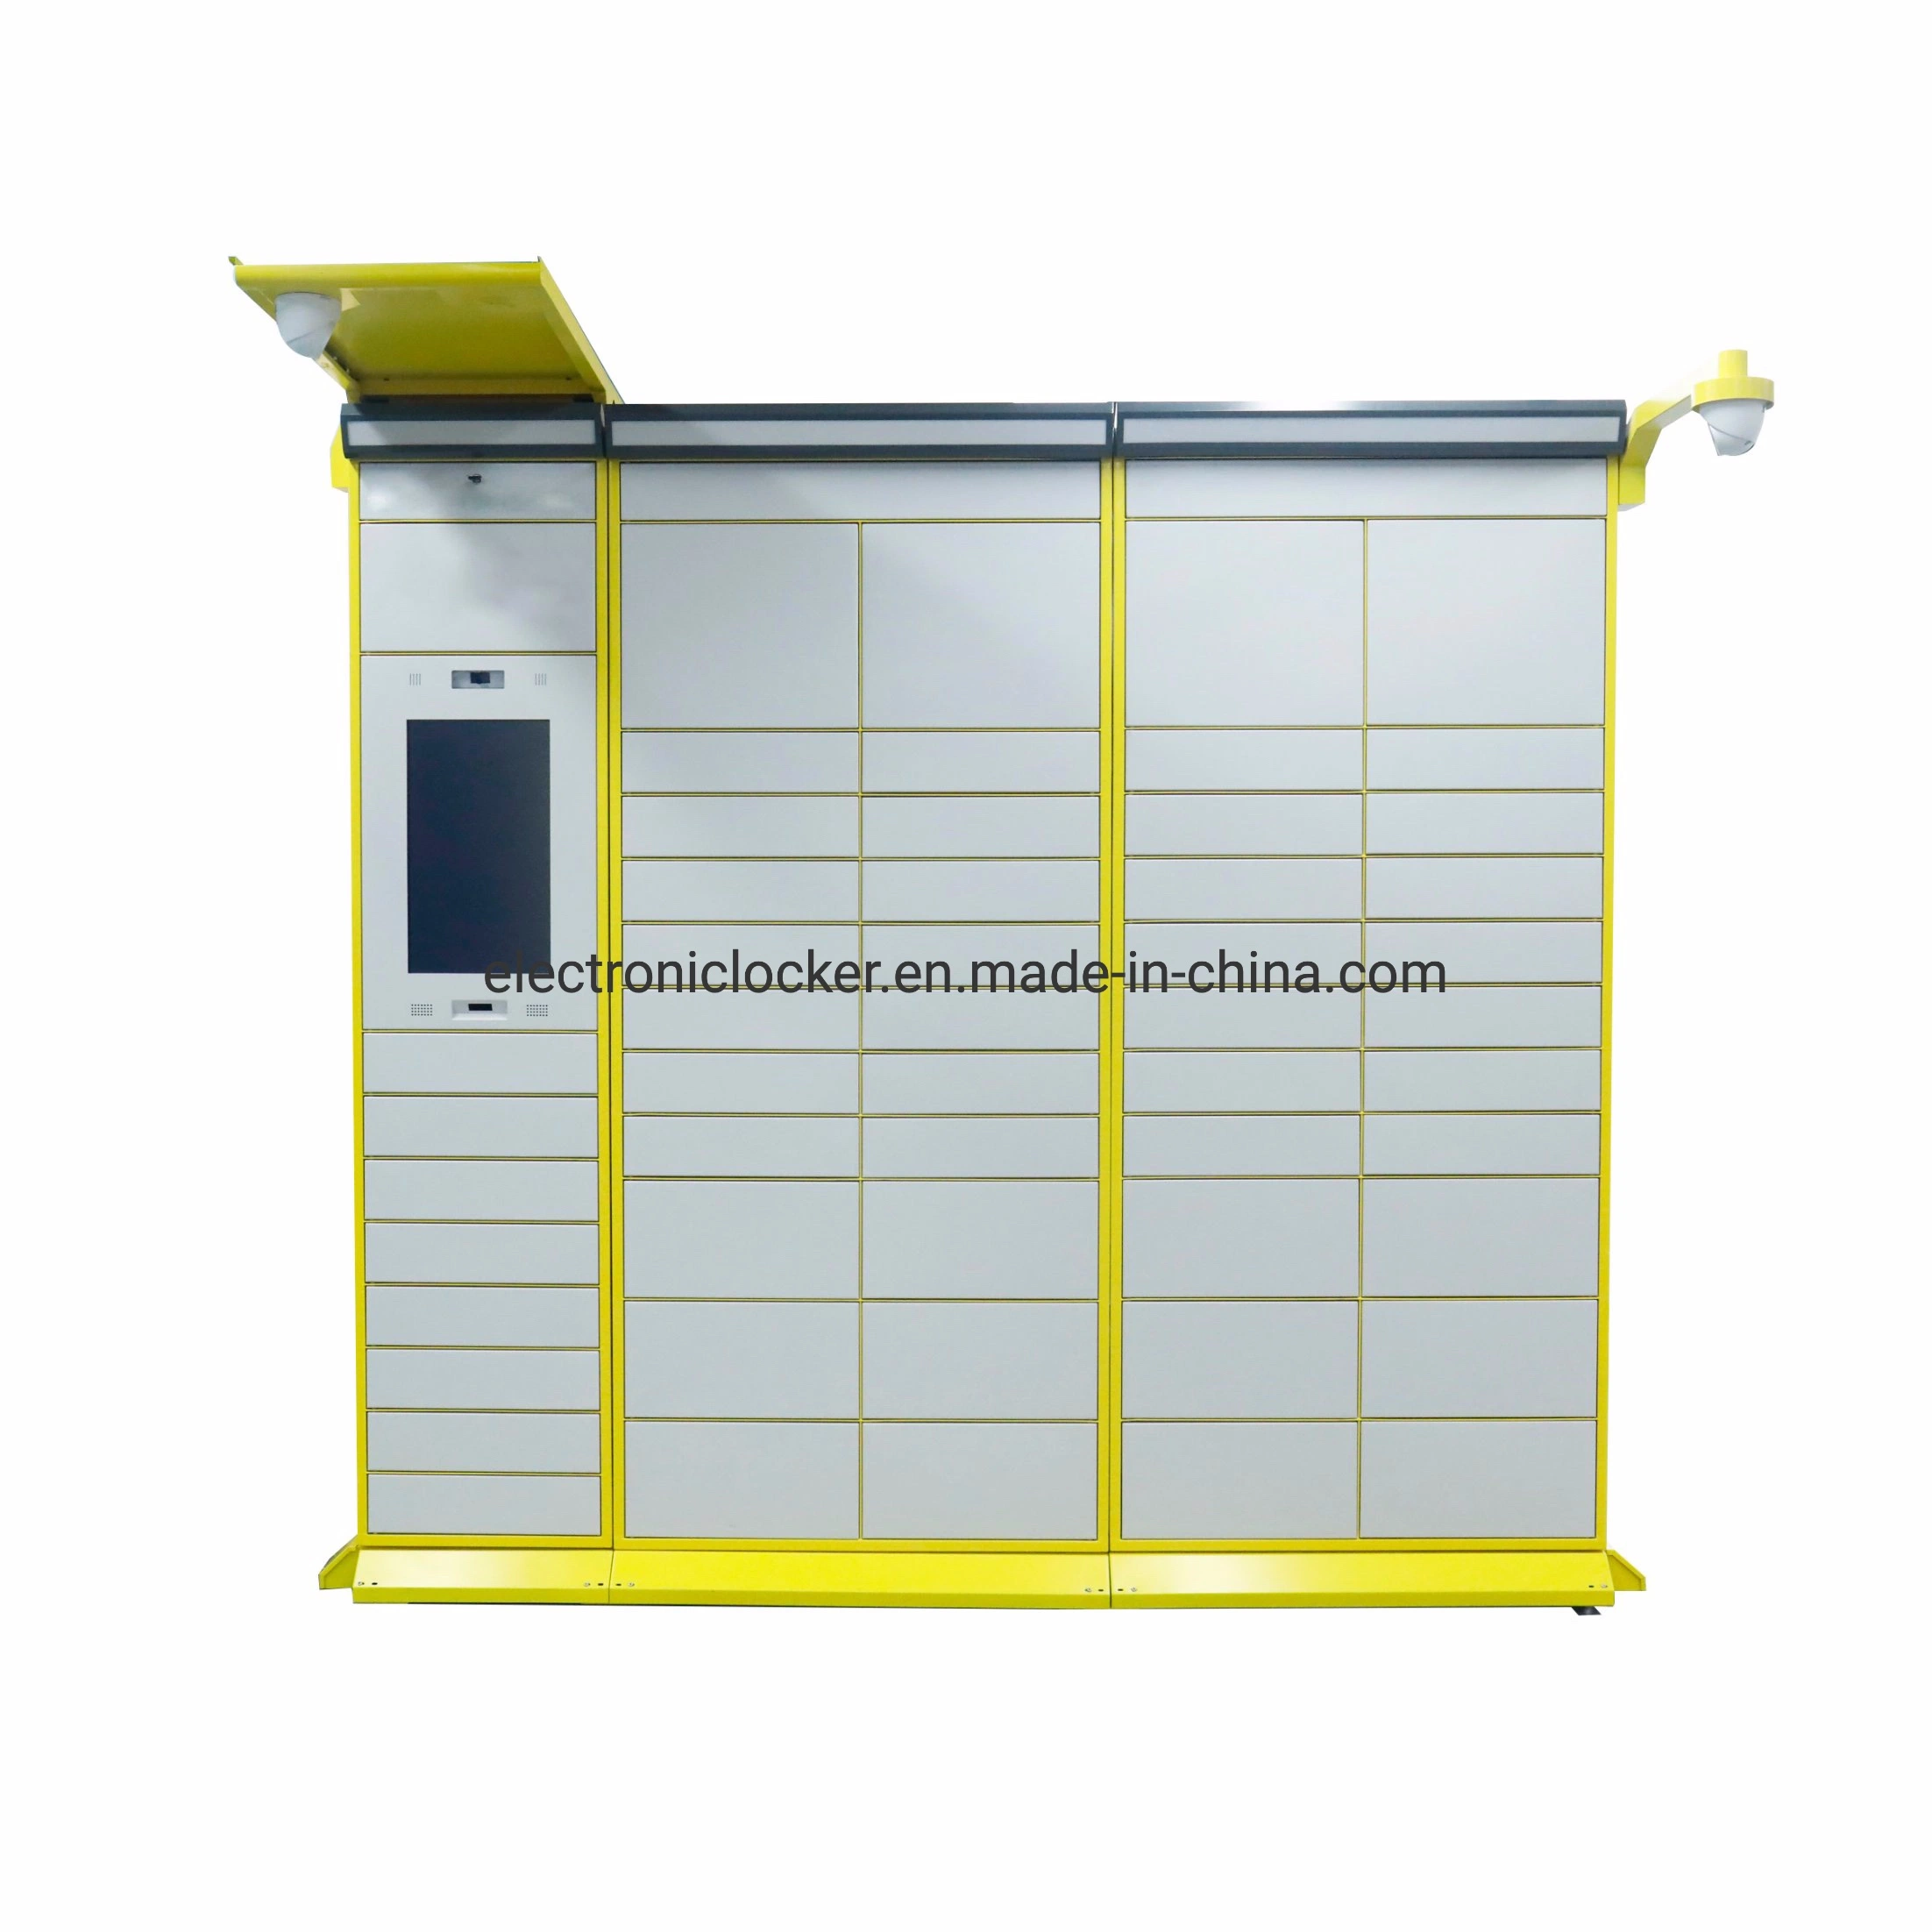 CE, ISO New DC Plywood Case Electronic Gym Lockers Parcel Locker